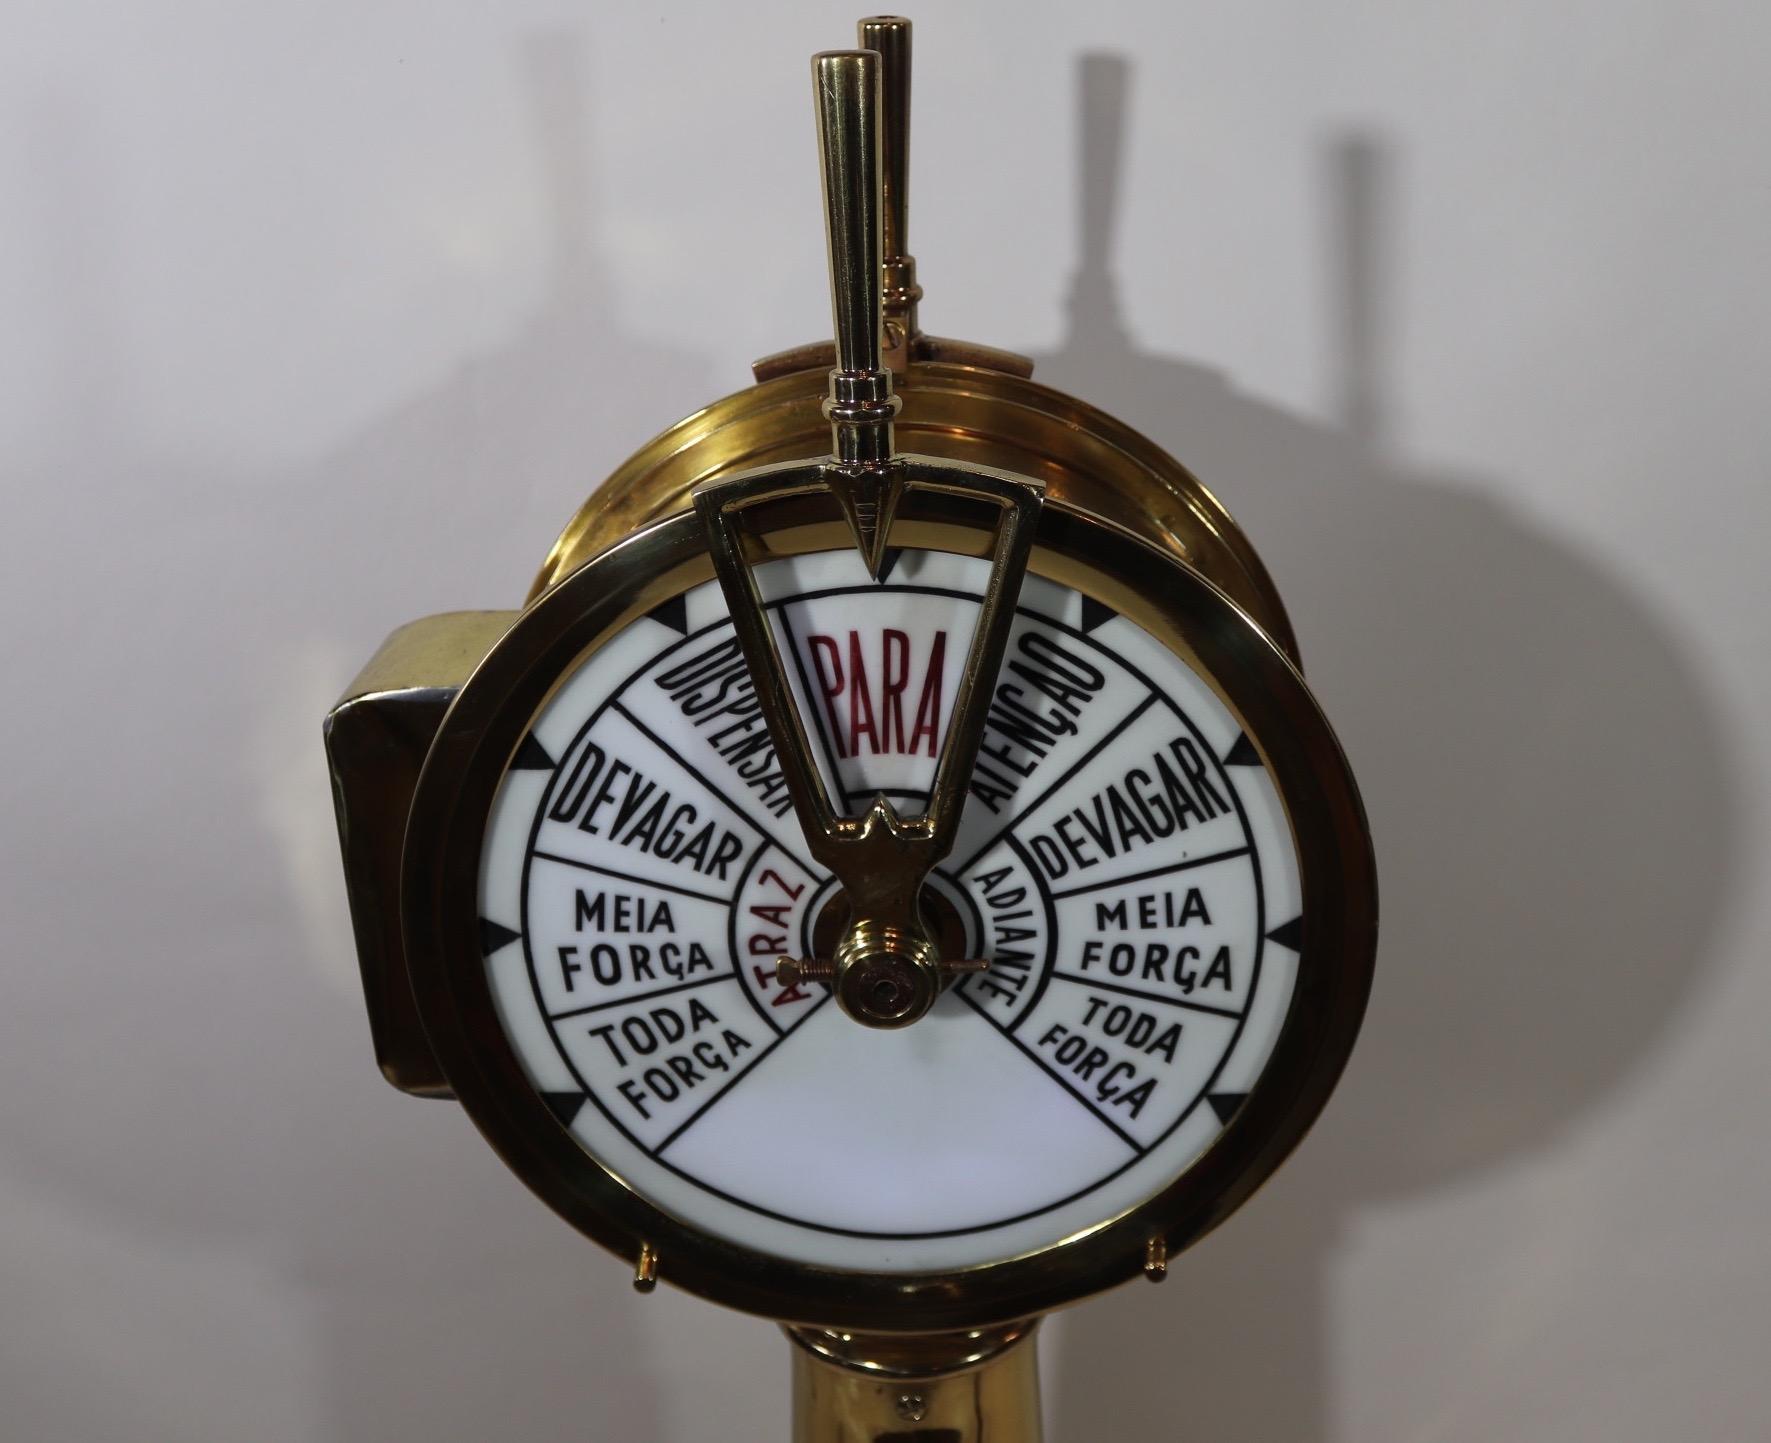 Splendid ships engine order telegraph that has been meticulously polished and lacquered. The faceplate commands are in Portuguese. The inside has been illuminated by us to make the faceplates flow. Fitted to a custom wood base with varnished finish,